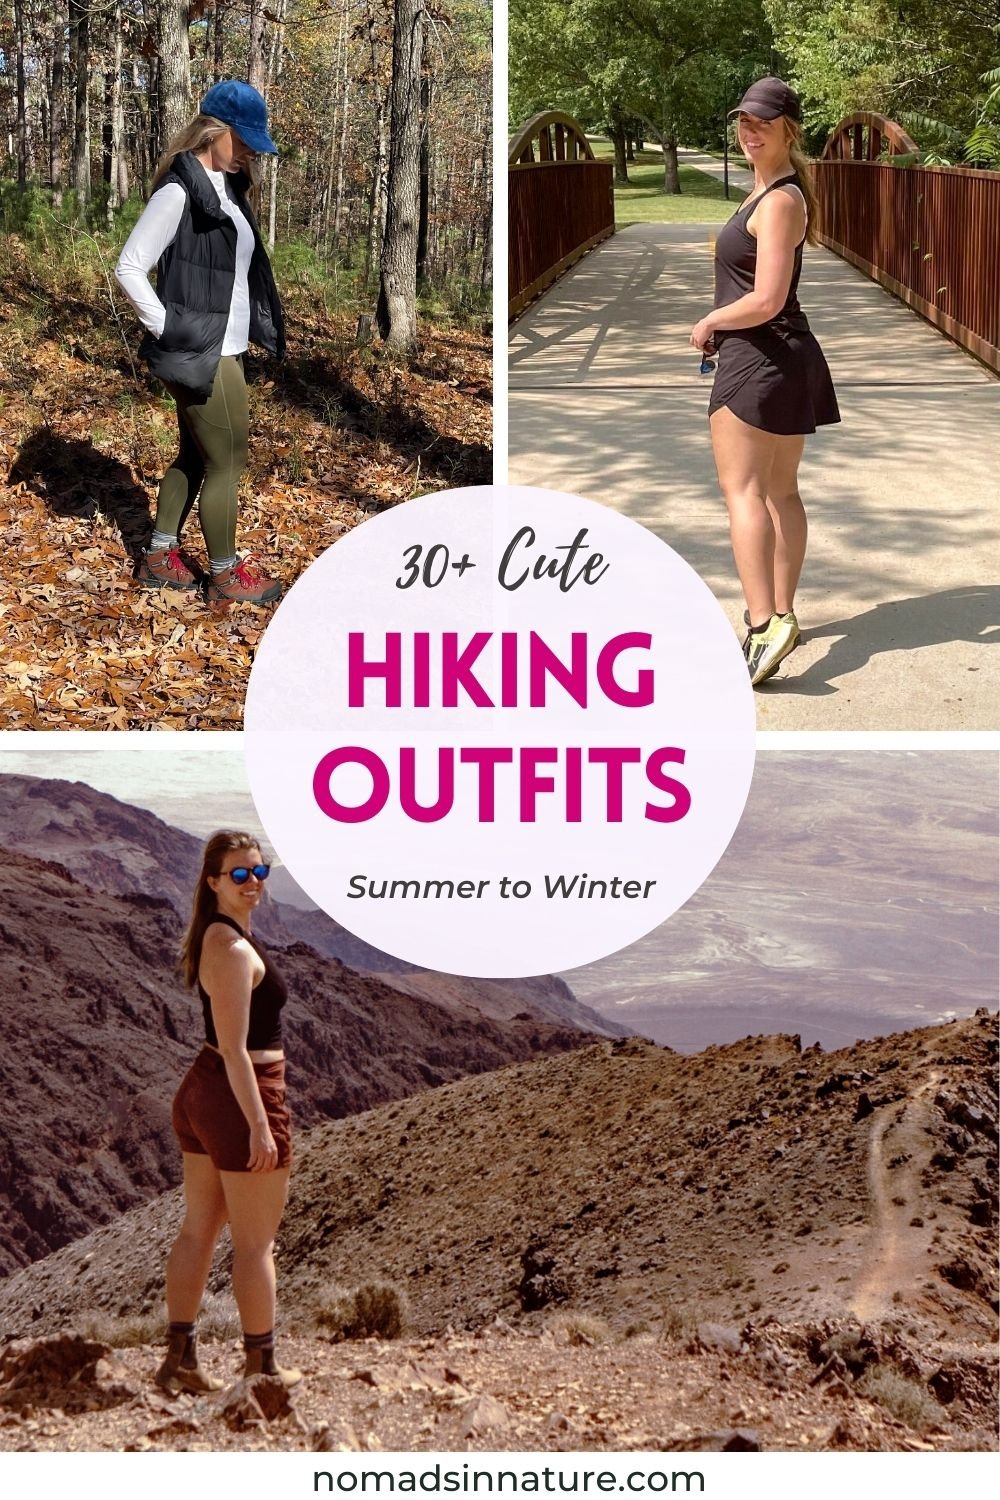 10 Hiking fall ideas  hiking outfit women, camping outfits